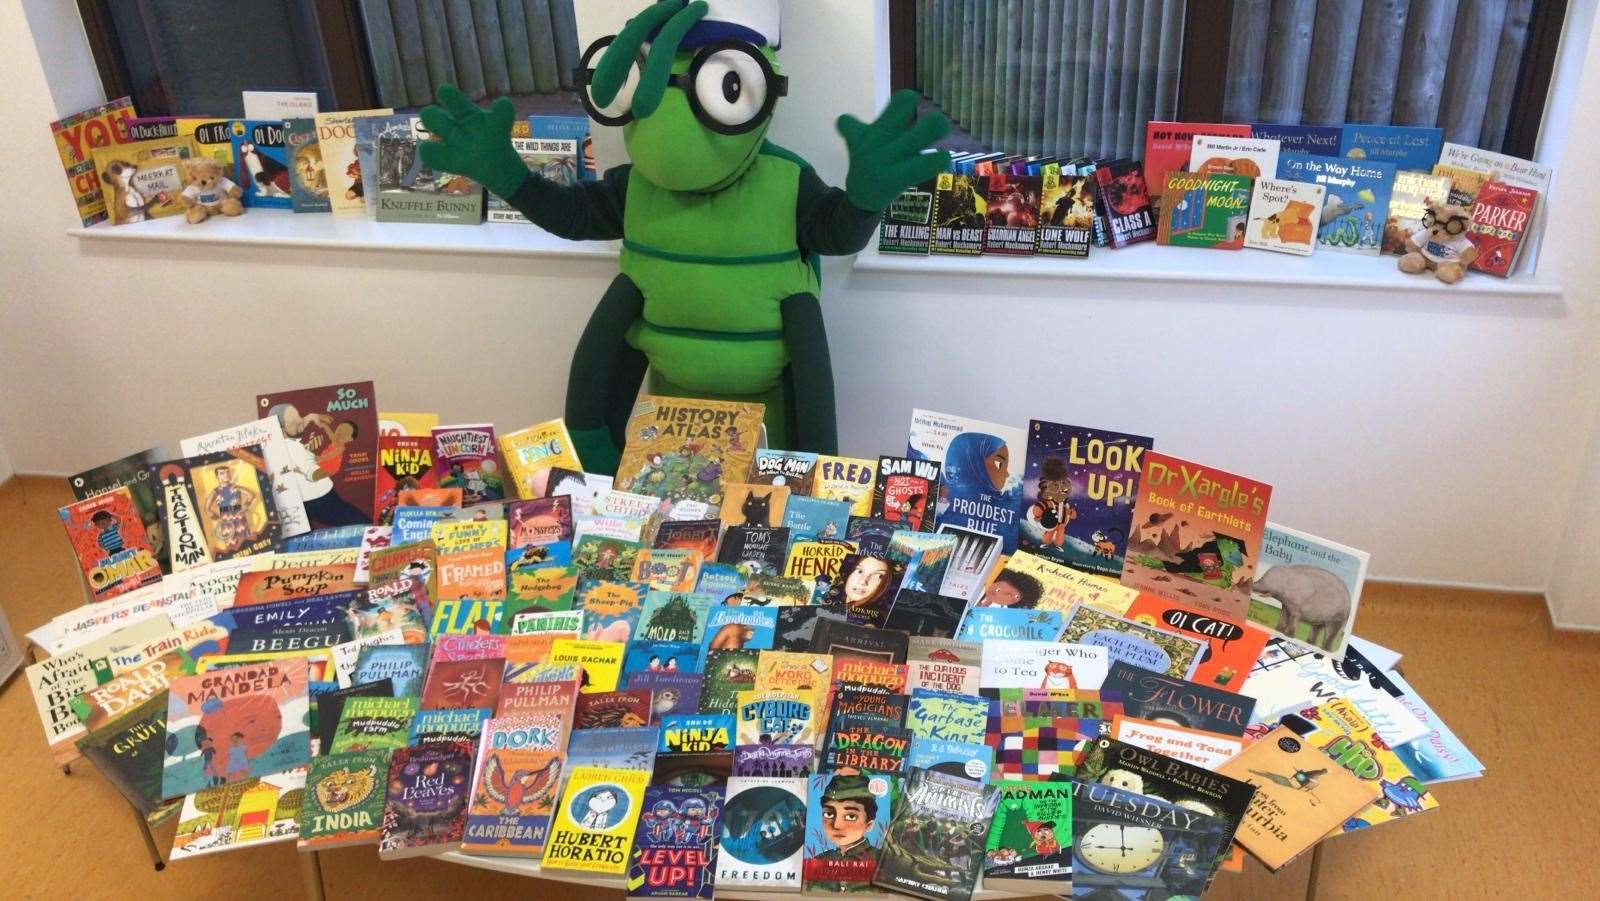 KM Charity Team mascot Buster Bug with the books donated by Scholastic Ltd.